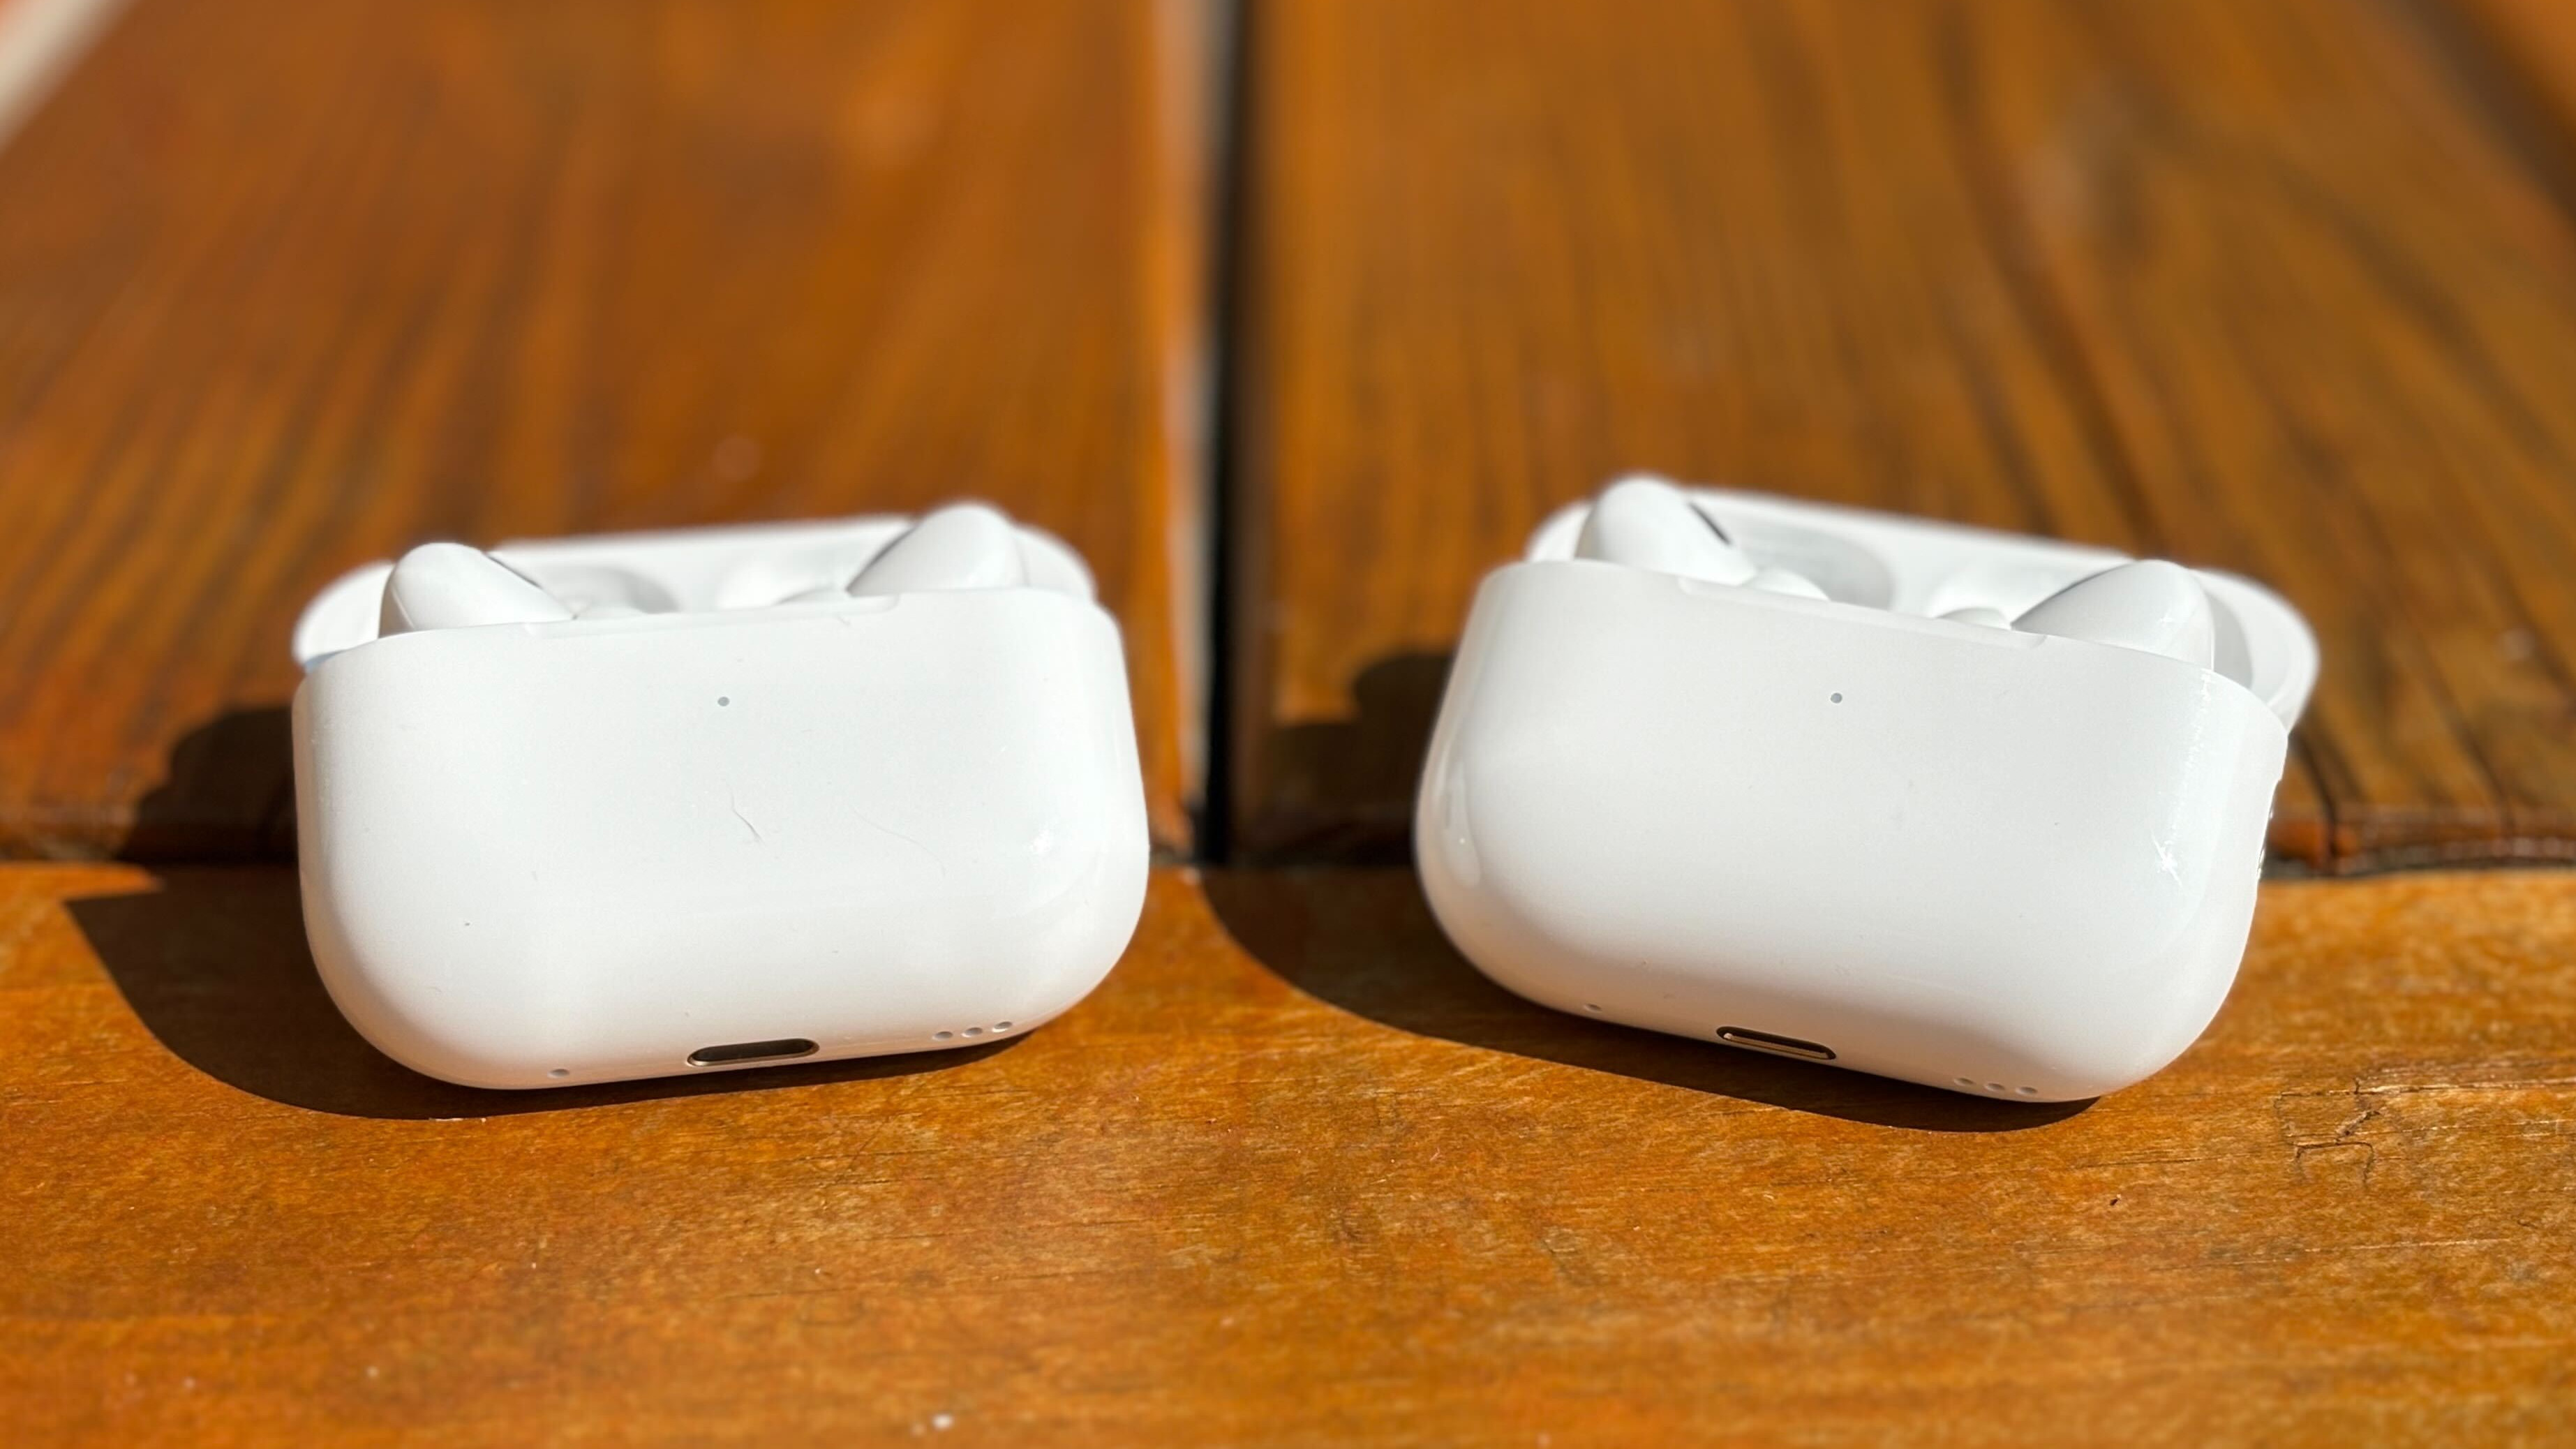 Apple AirPods Pro 2 Vs AirPods Pro: What's The Difference?